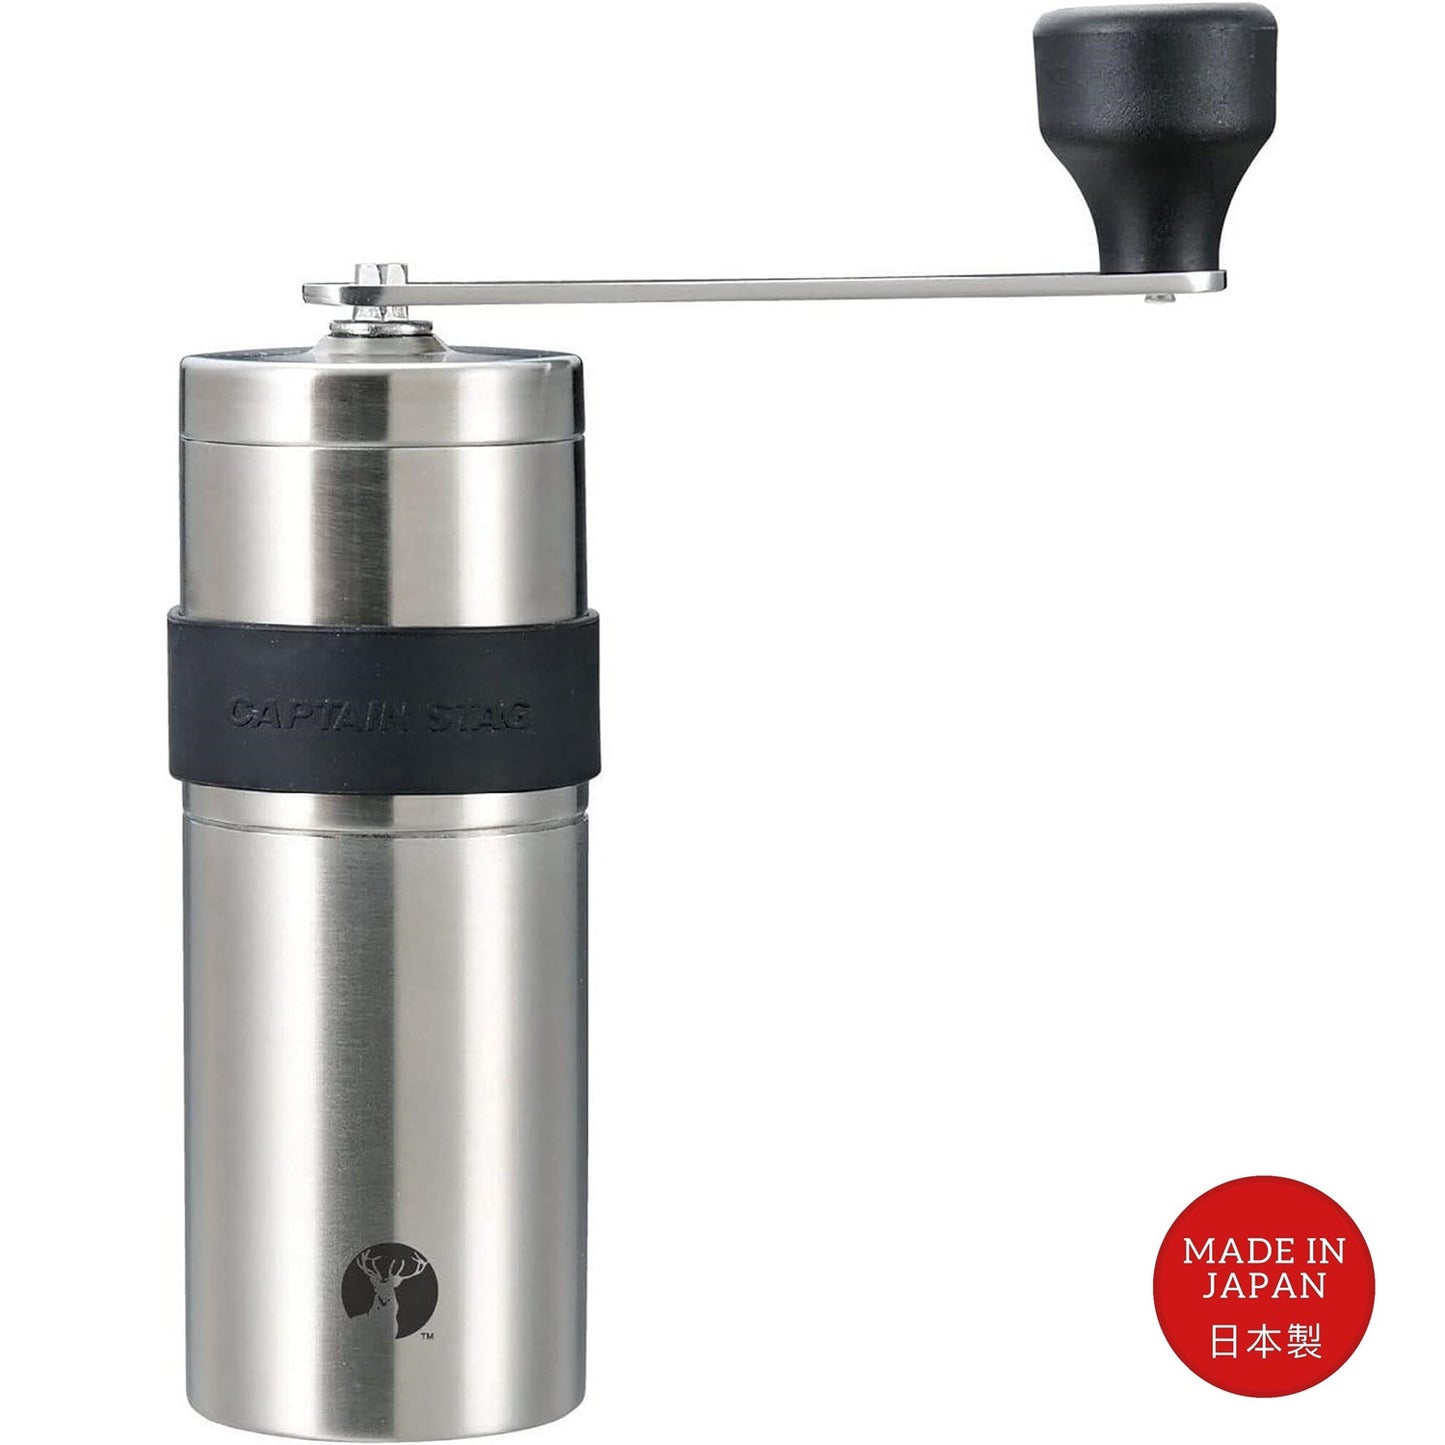 Captain Stag Stainless Steel Handy Coffee Grinder - Made in Japan